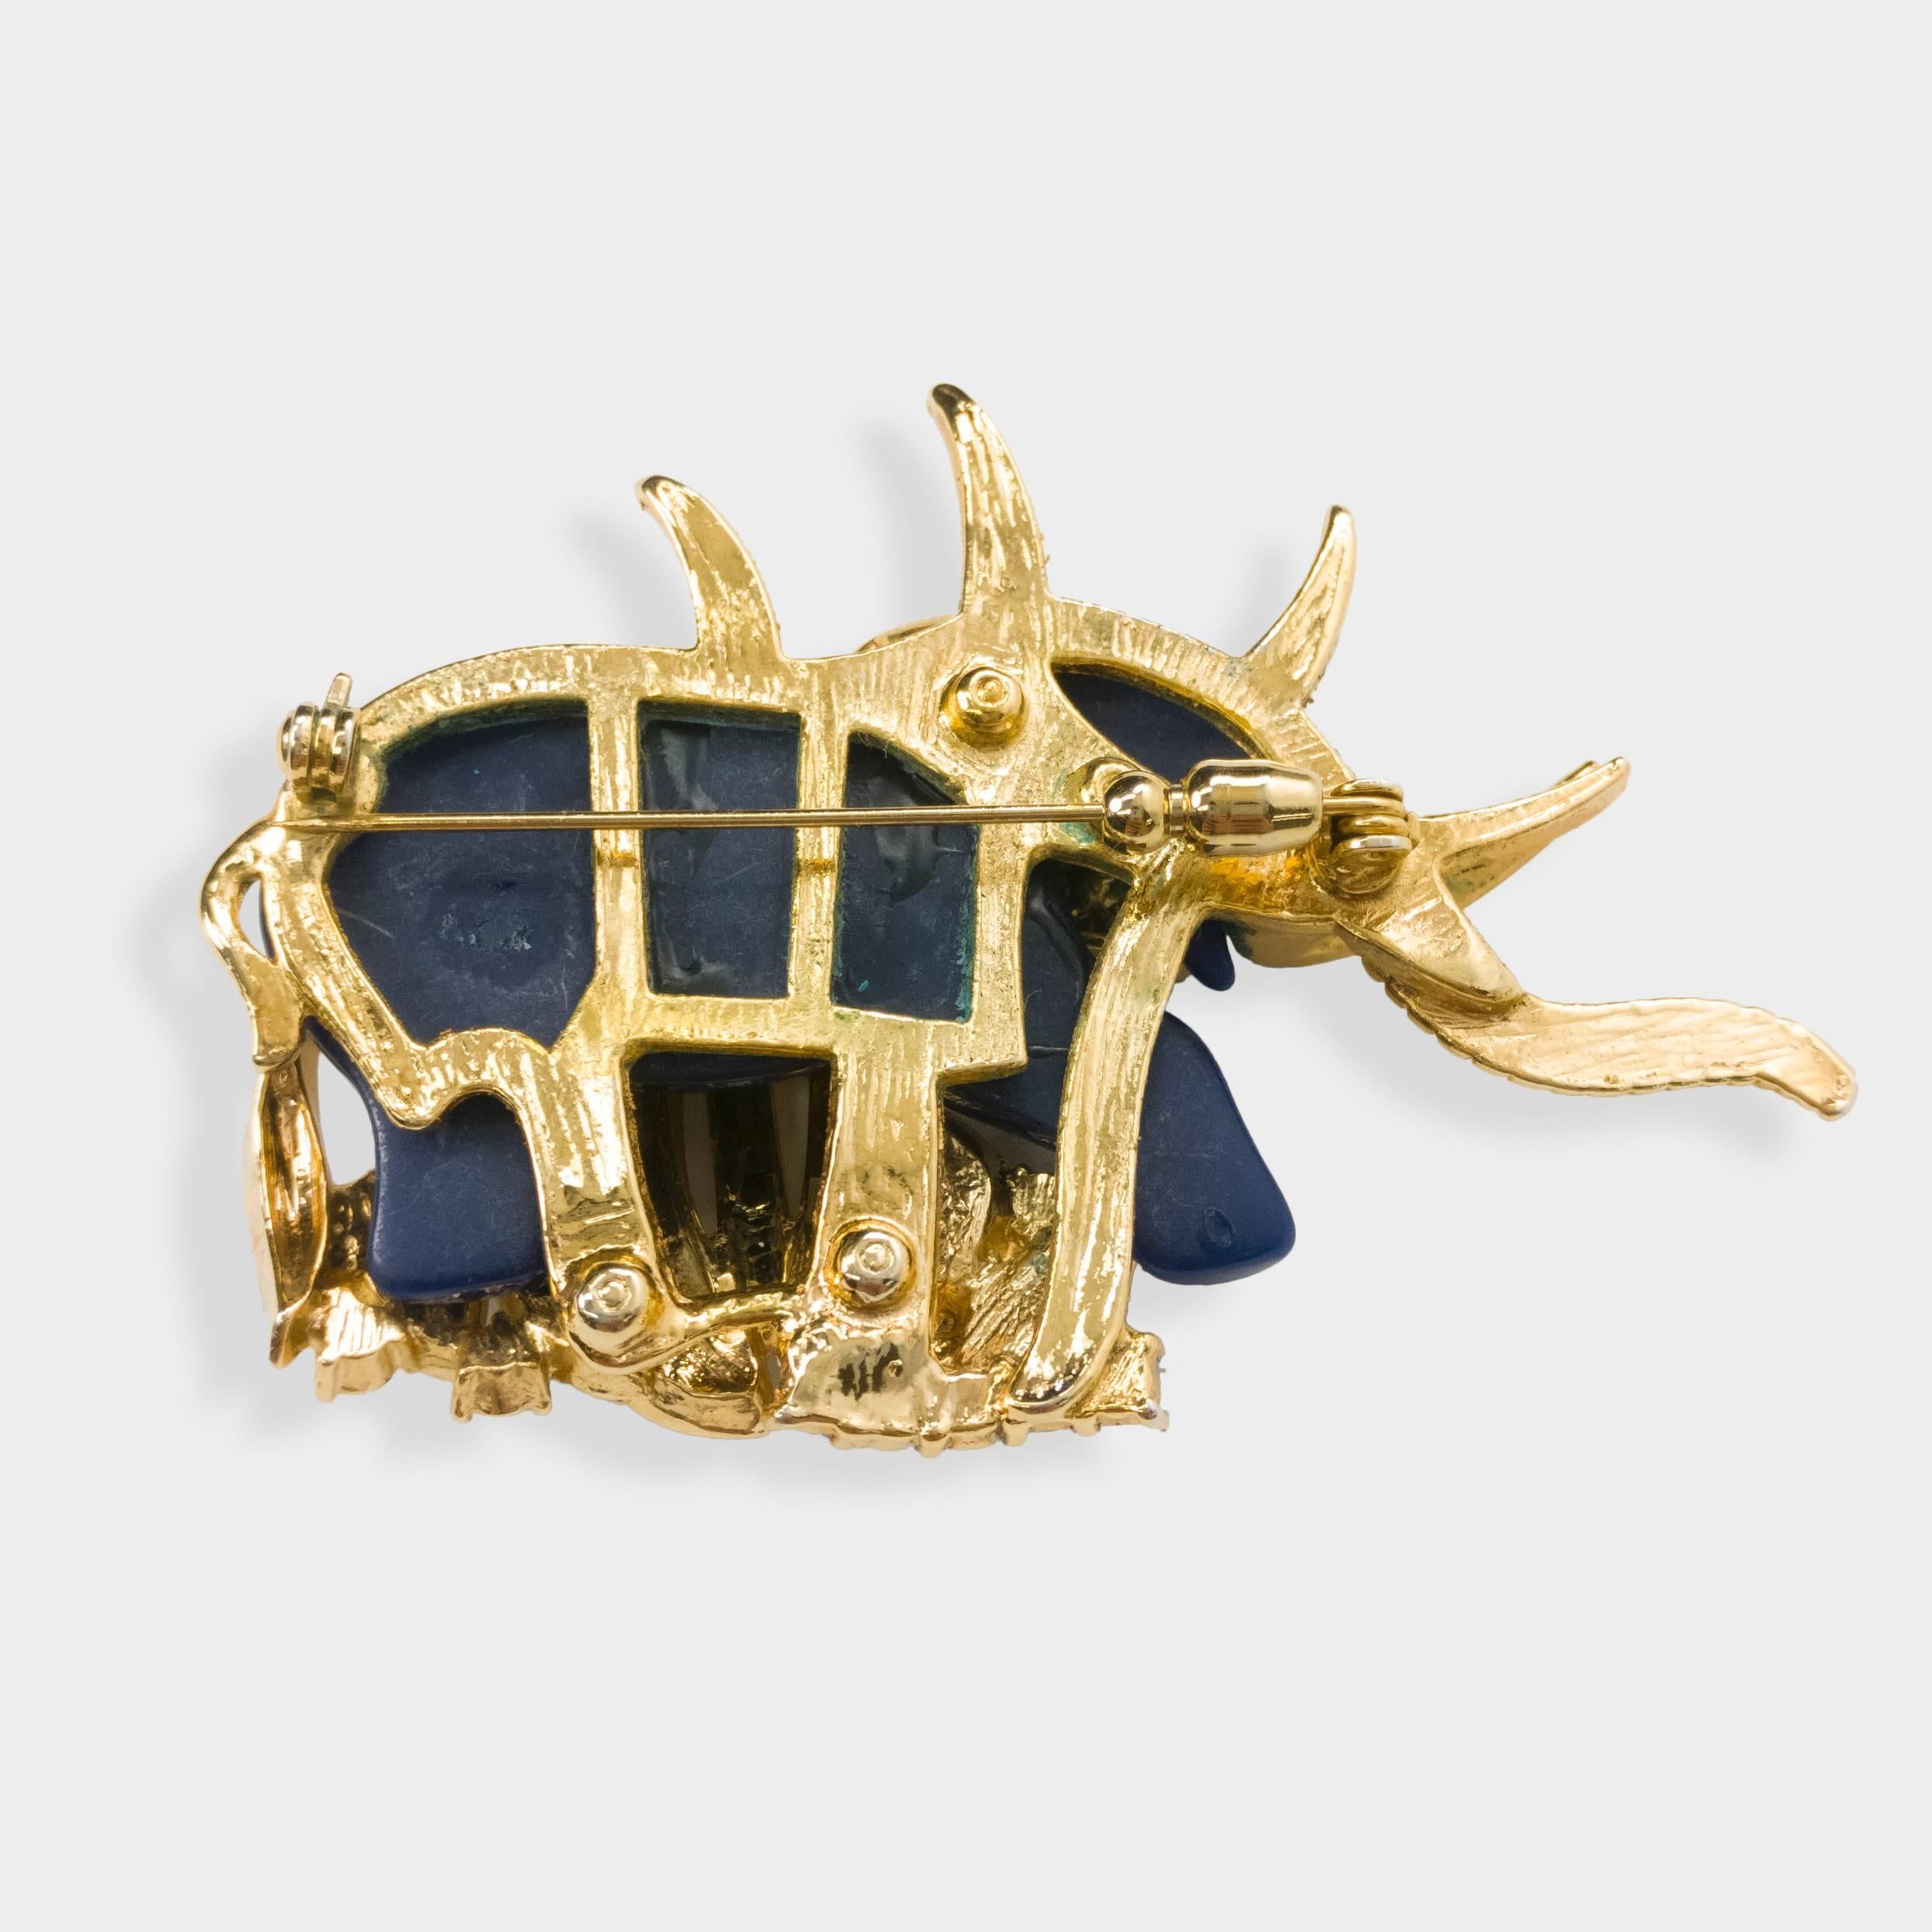 Featuring a Stunning Vintage Brooch of an Elephant in the Grass, surrounded by sparkling CZ; by famed High End Designer Hattie Carnegie; approx. 3